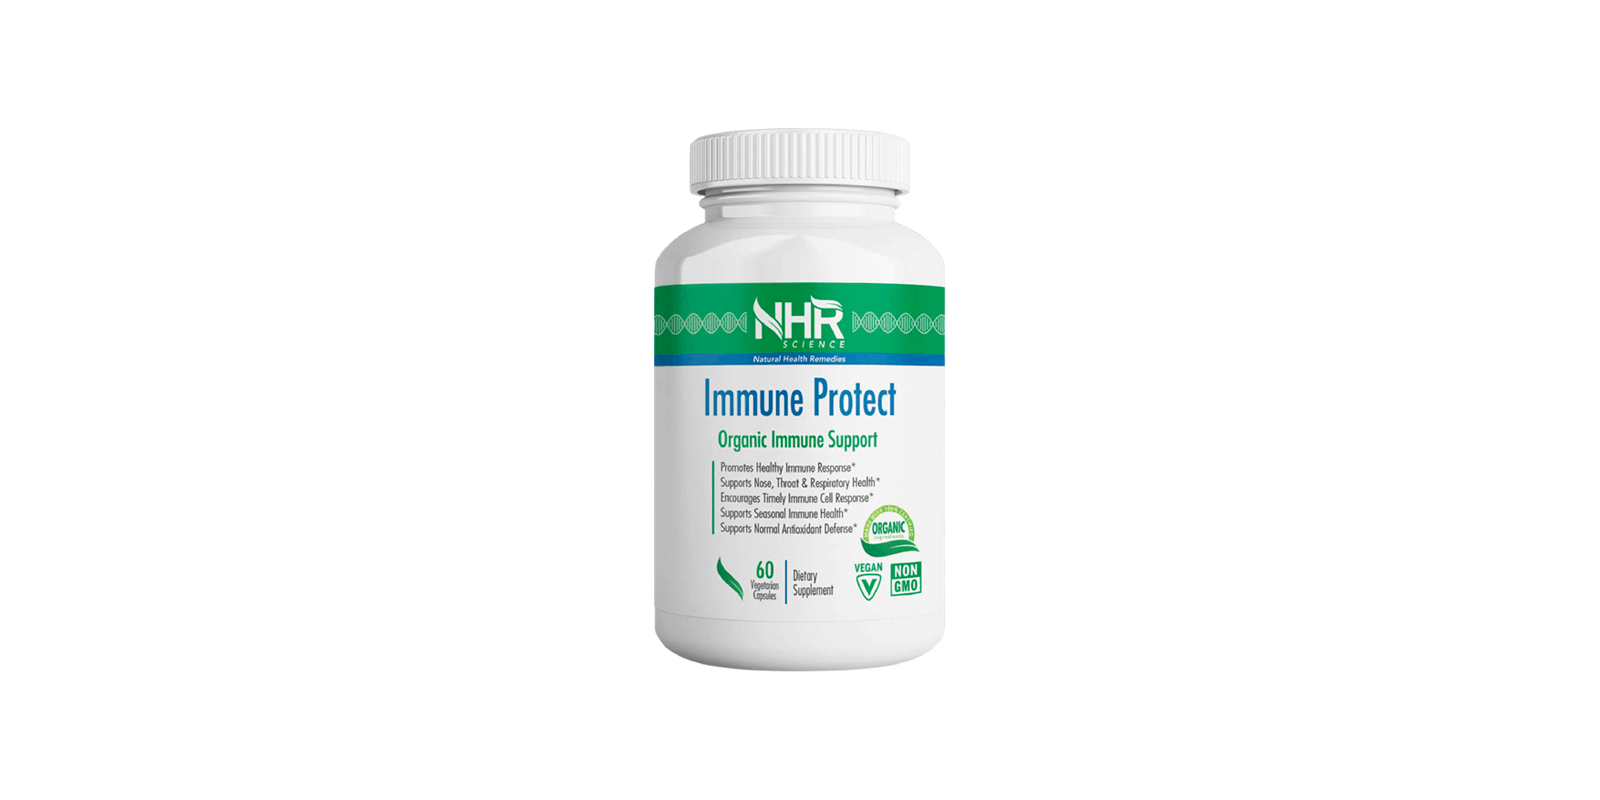 NHR Science Immune Protect Reviews